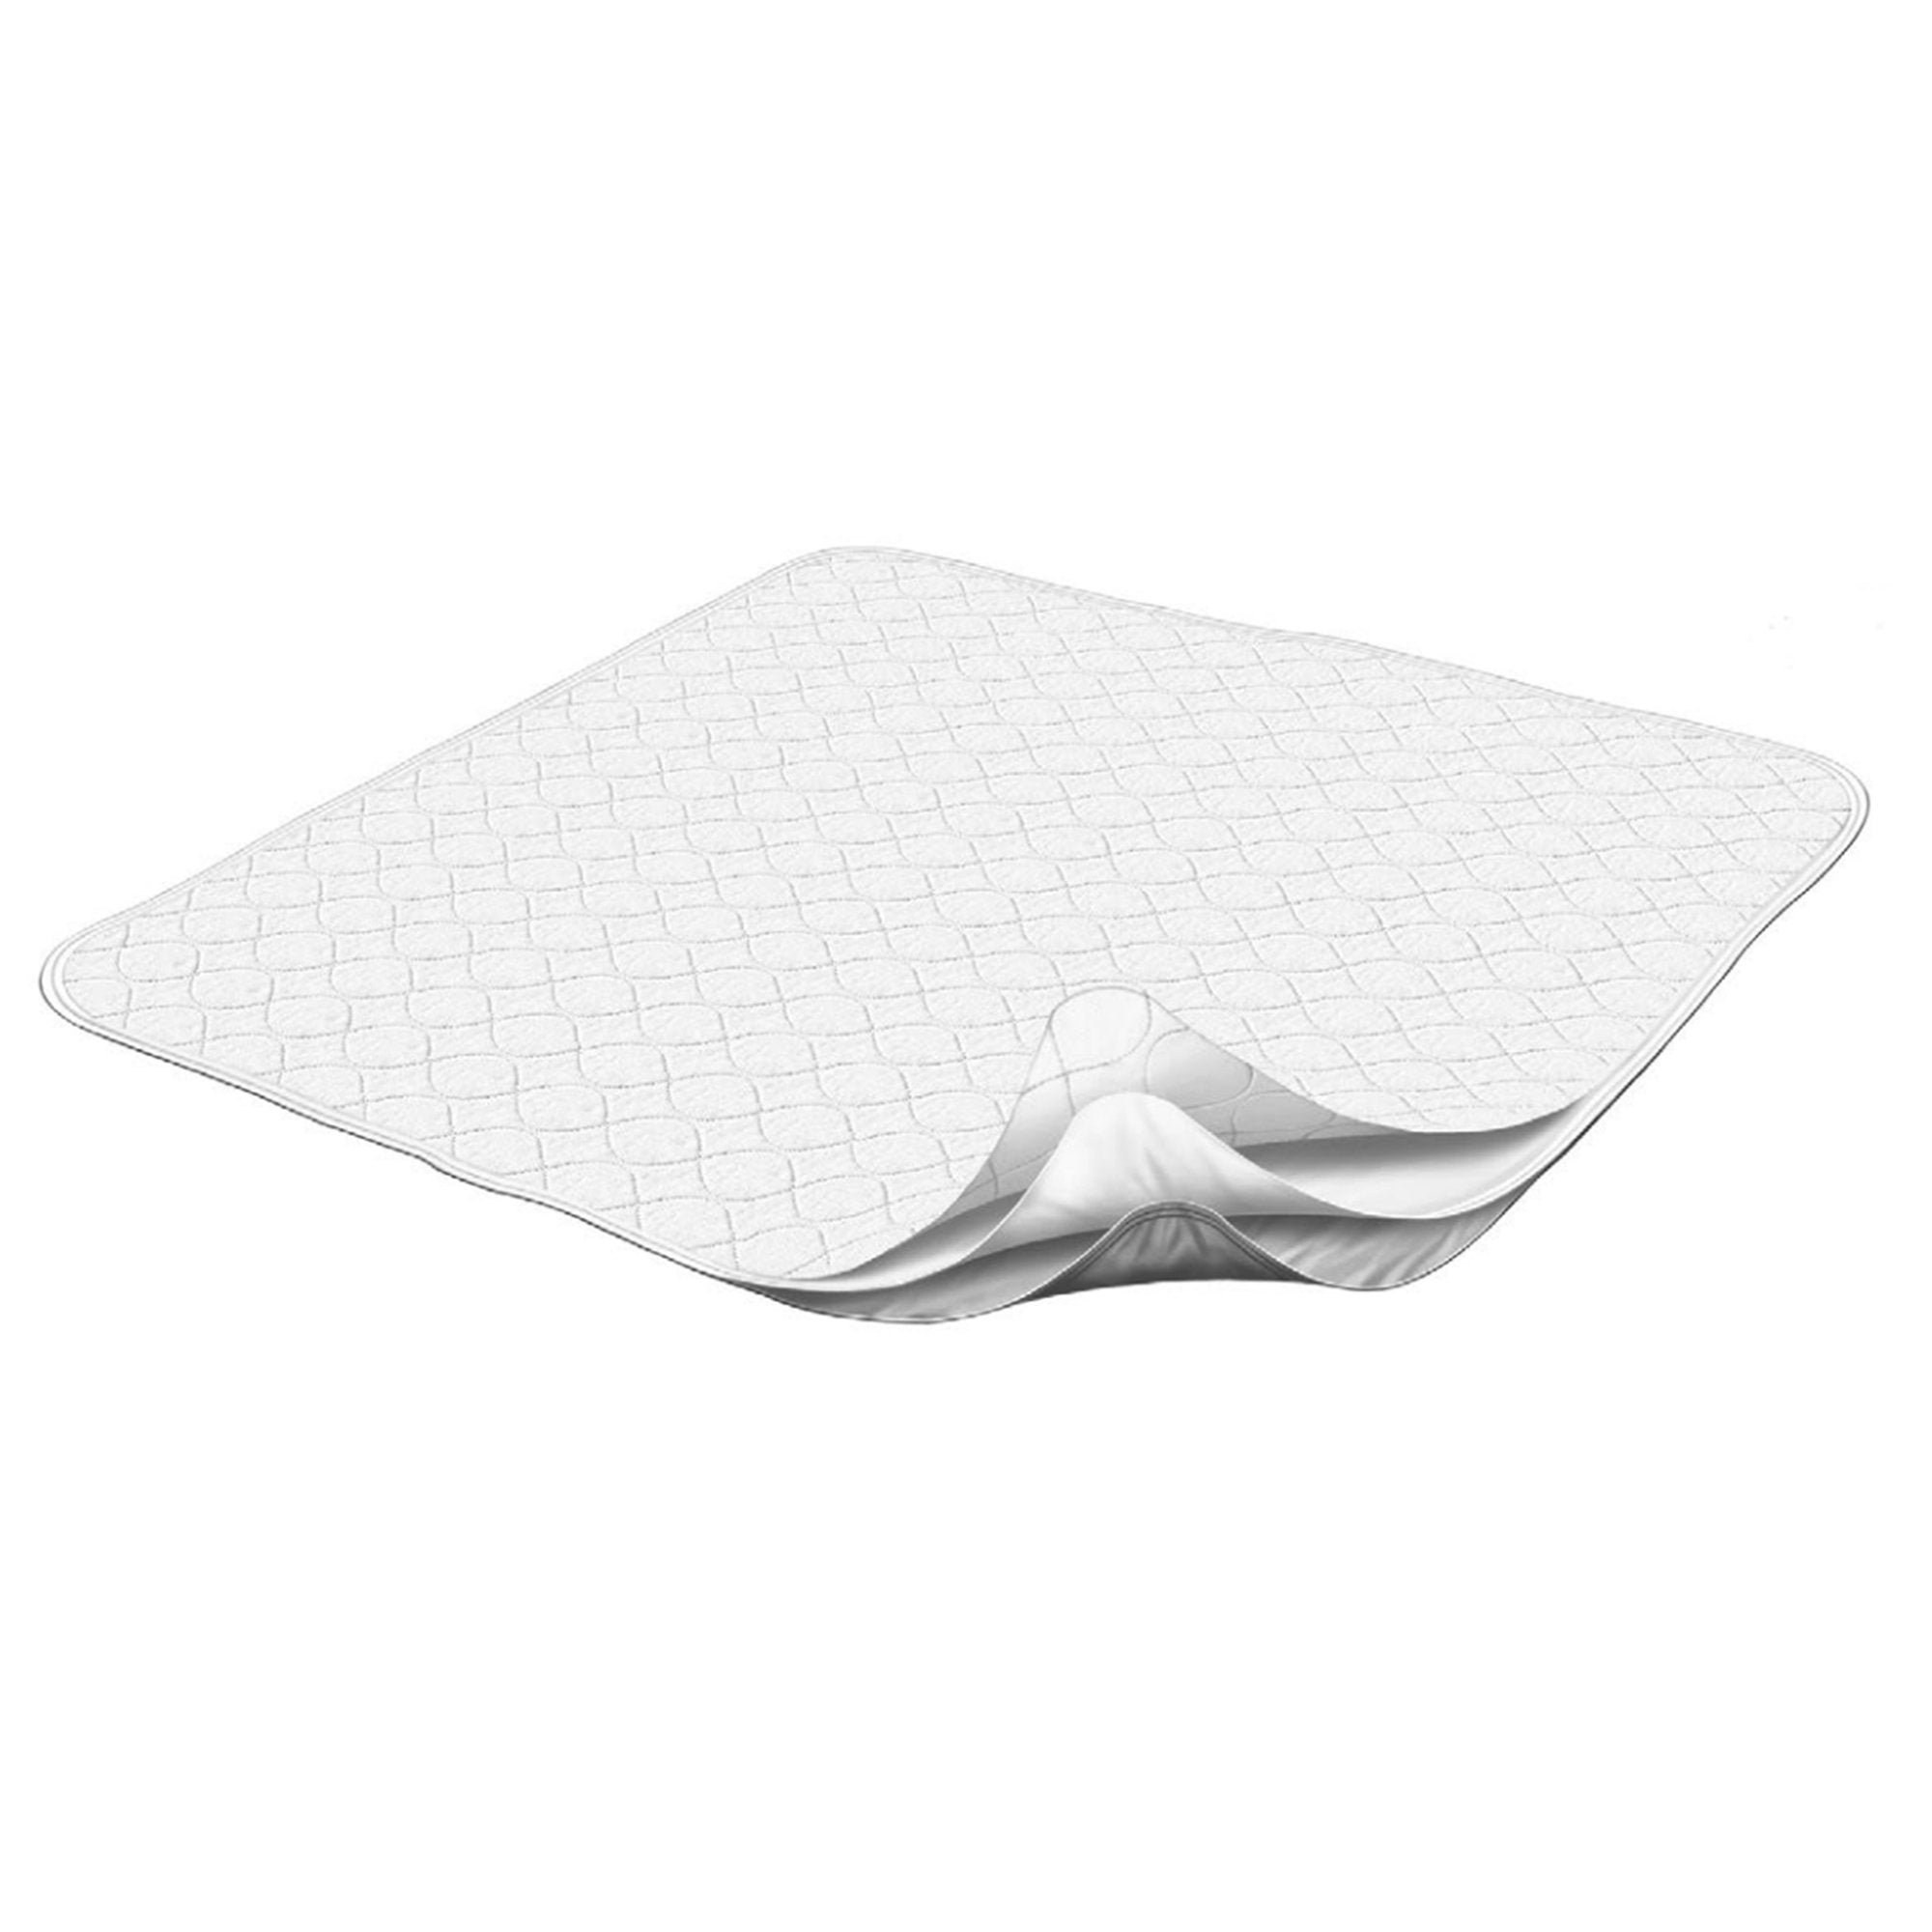 Reusable Underpad Dignity® Washable Sheet Protector 35 X 54 Inch Cotton Moderate Absorbency